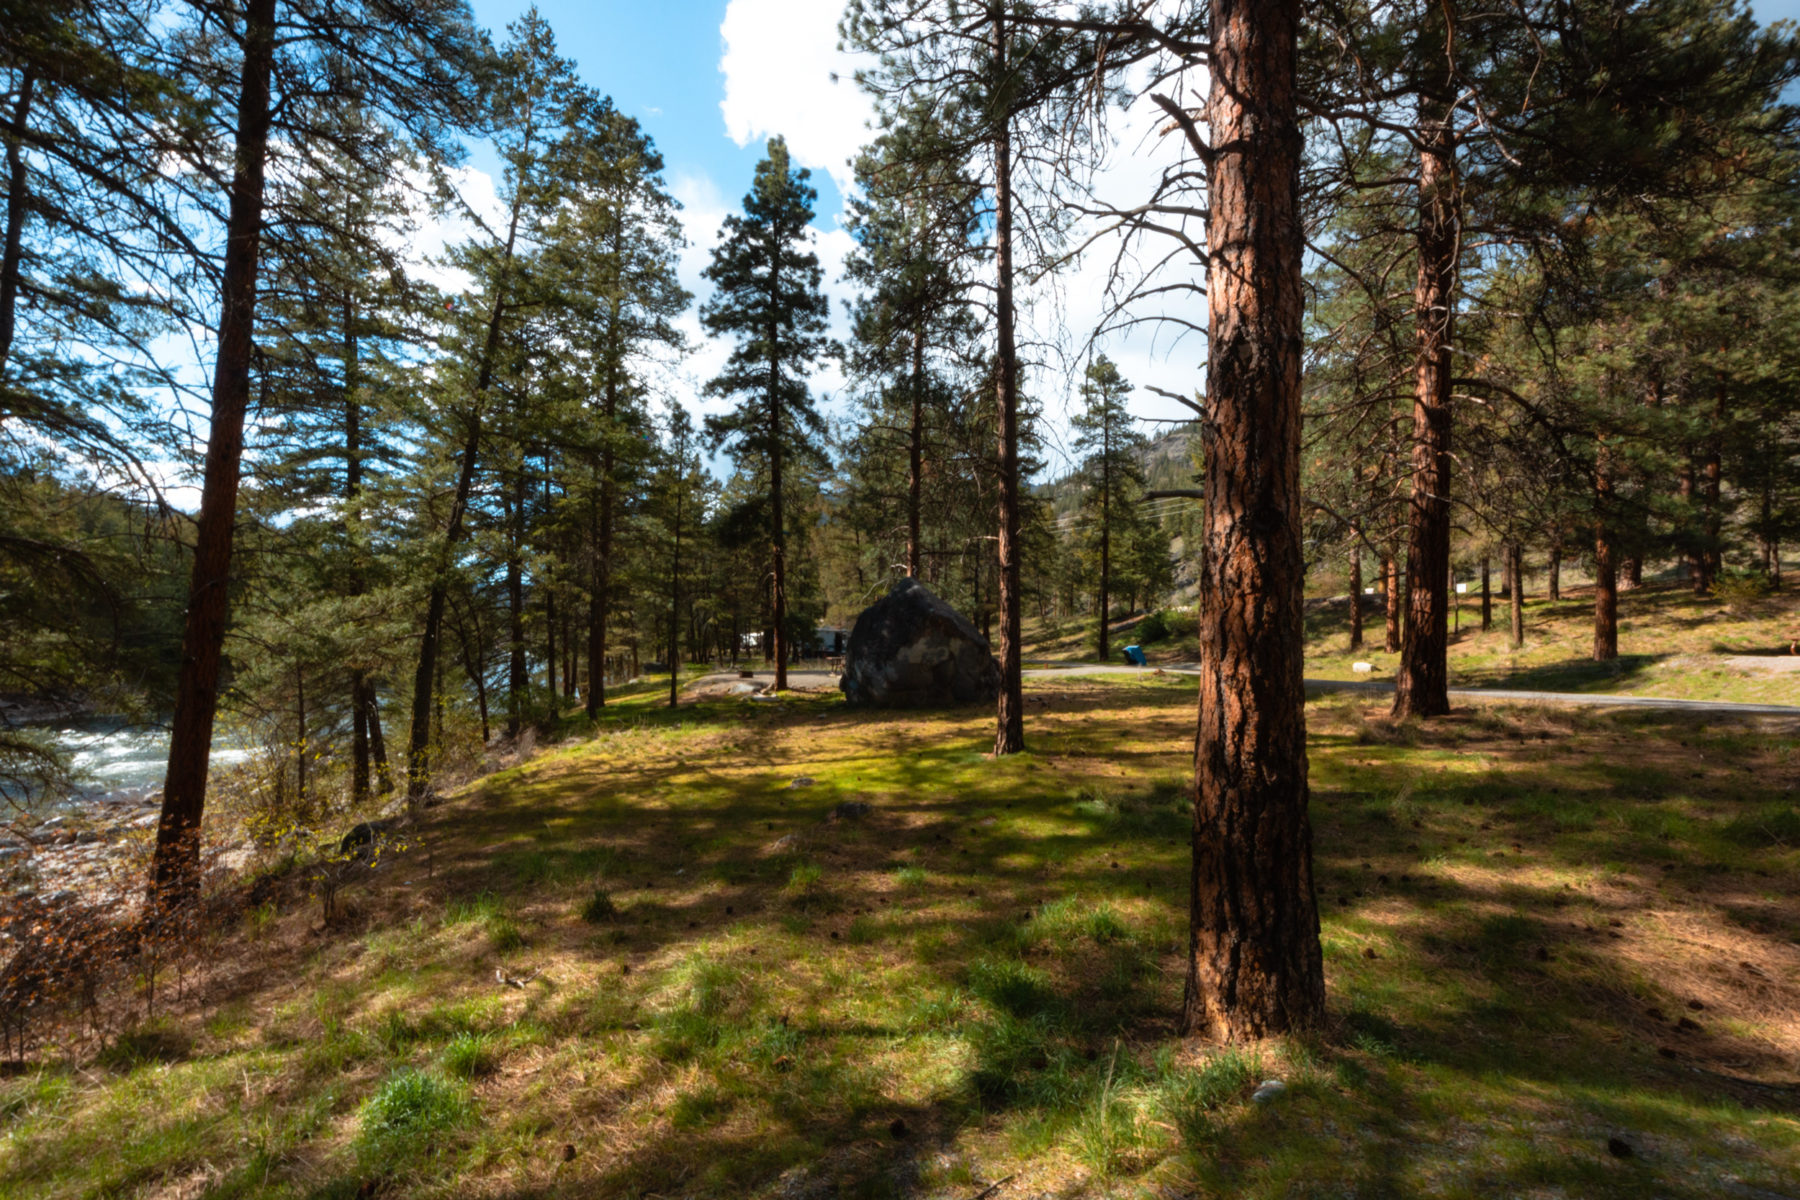 The campground at Stemwinder Provincial Park has tall Ponderosa pines and little underbrush